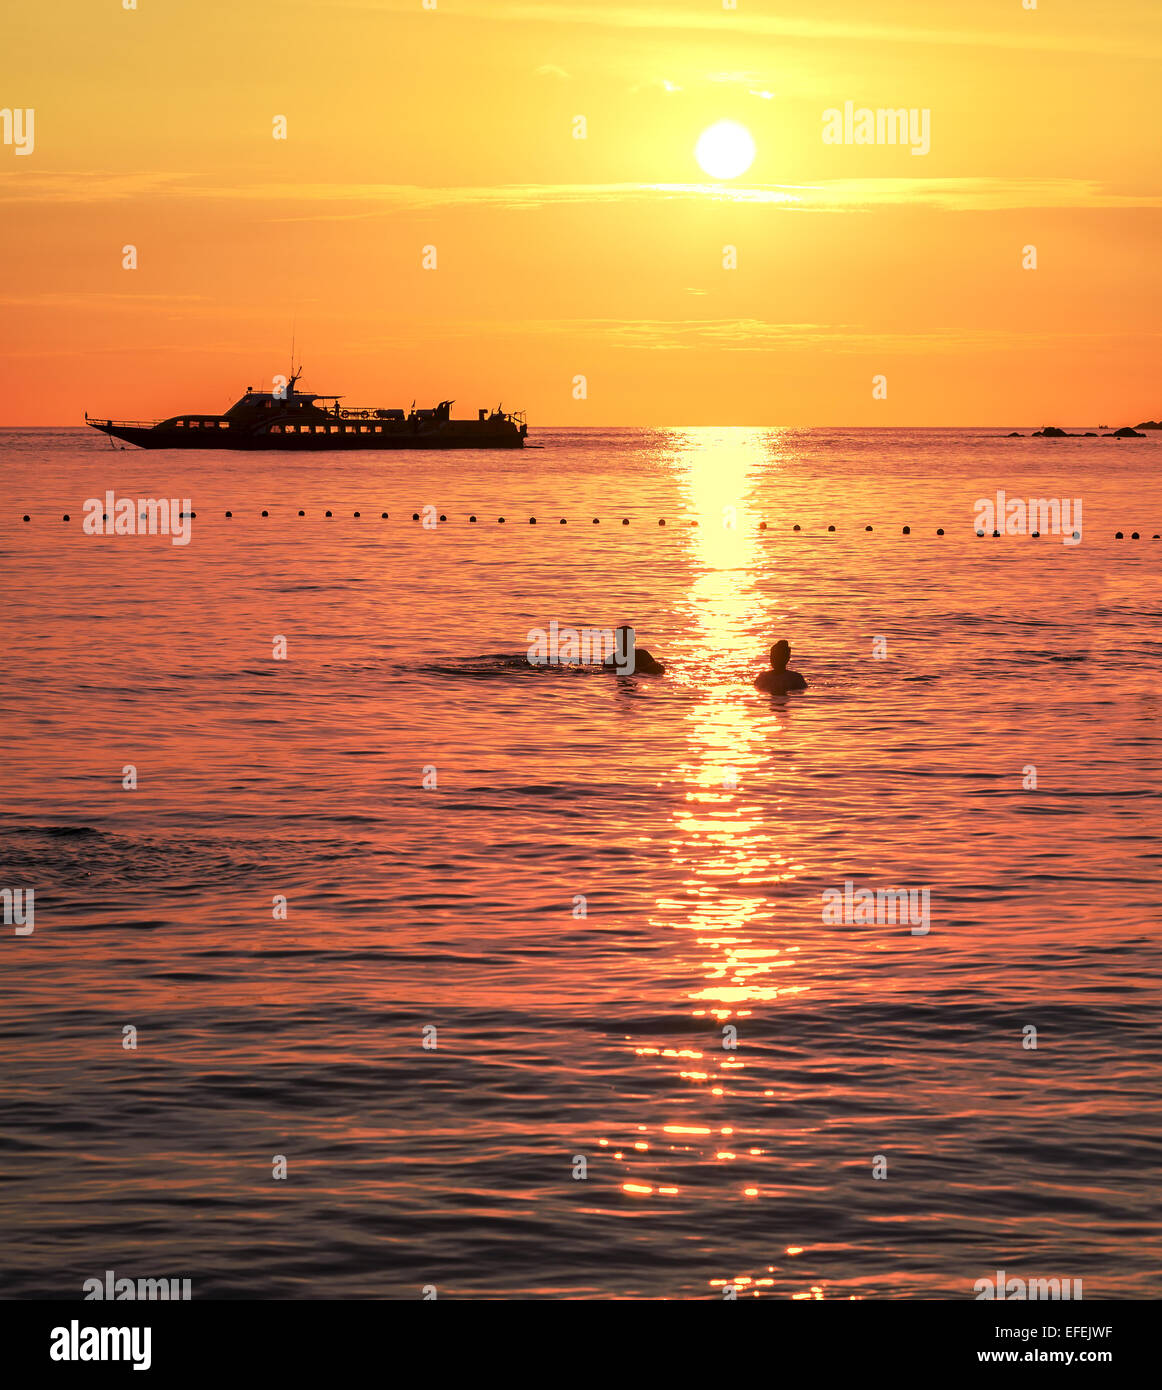 Silhouettes of a swimming couple and ship at sunset. Stock Photo